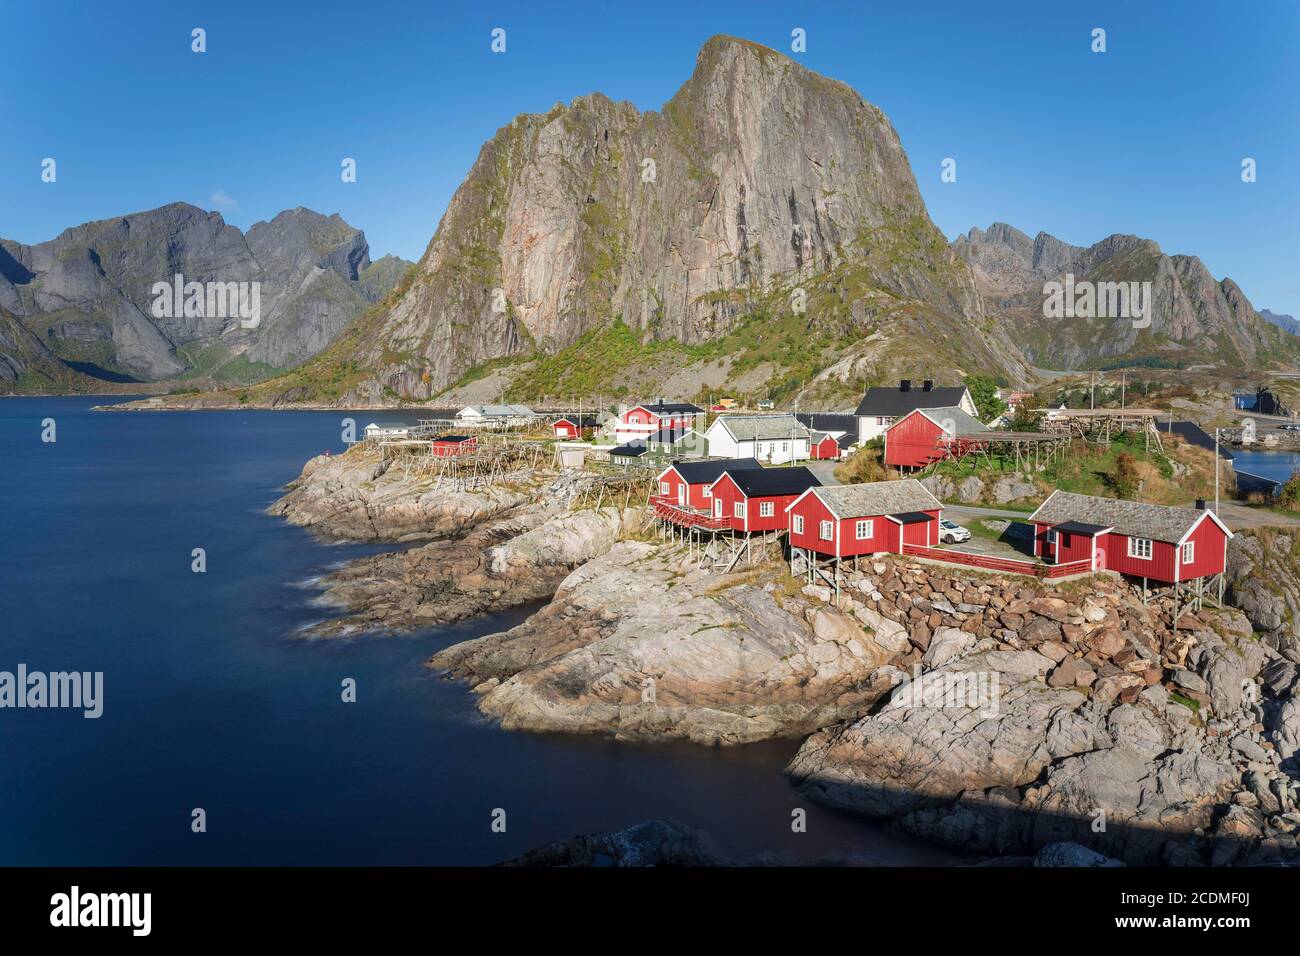 Red wooden houses Rorbu, Rorbu fishermen's cabins, by the Reine Fjord, Reinefjords, behind the mountain range of Festhaeltinten, Hamnoy Stock Photo